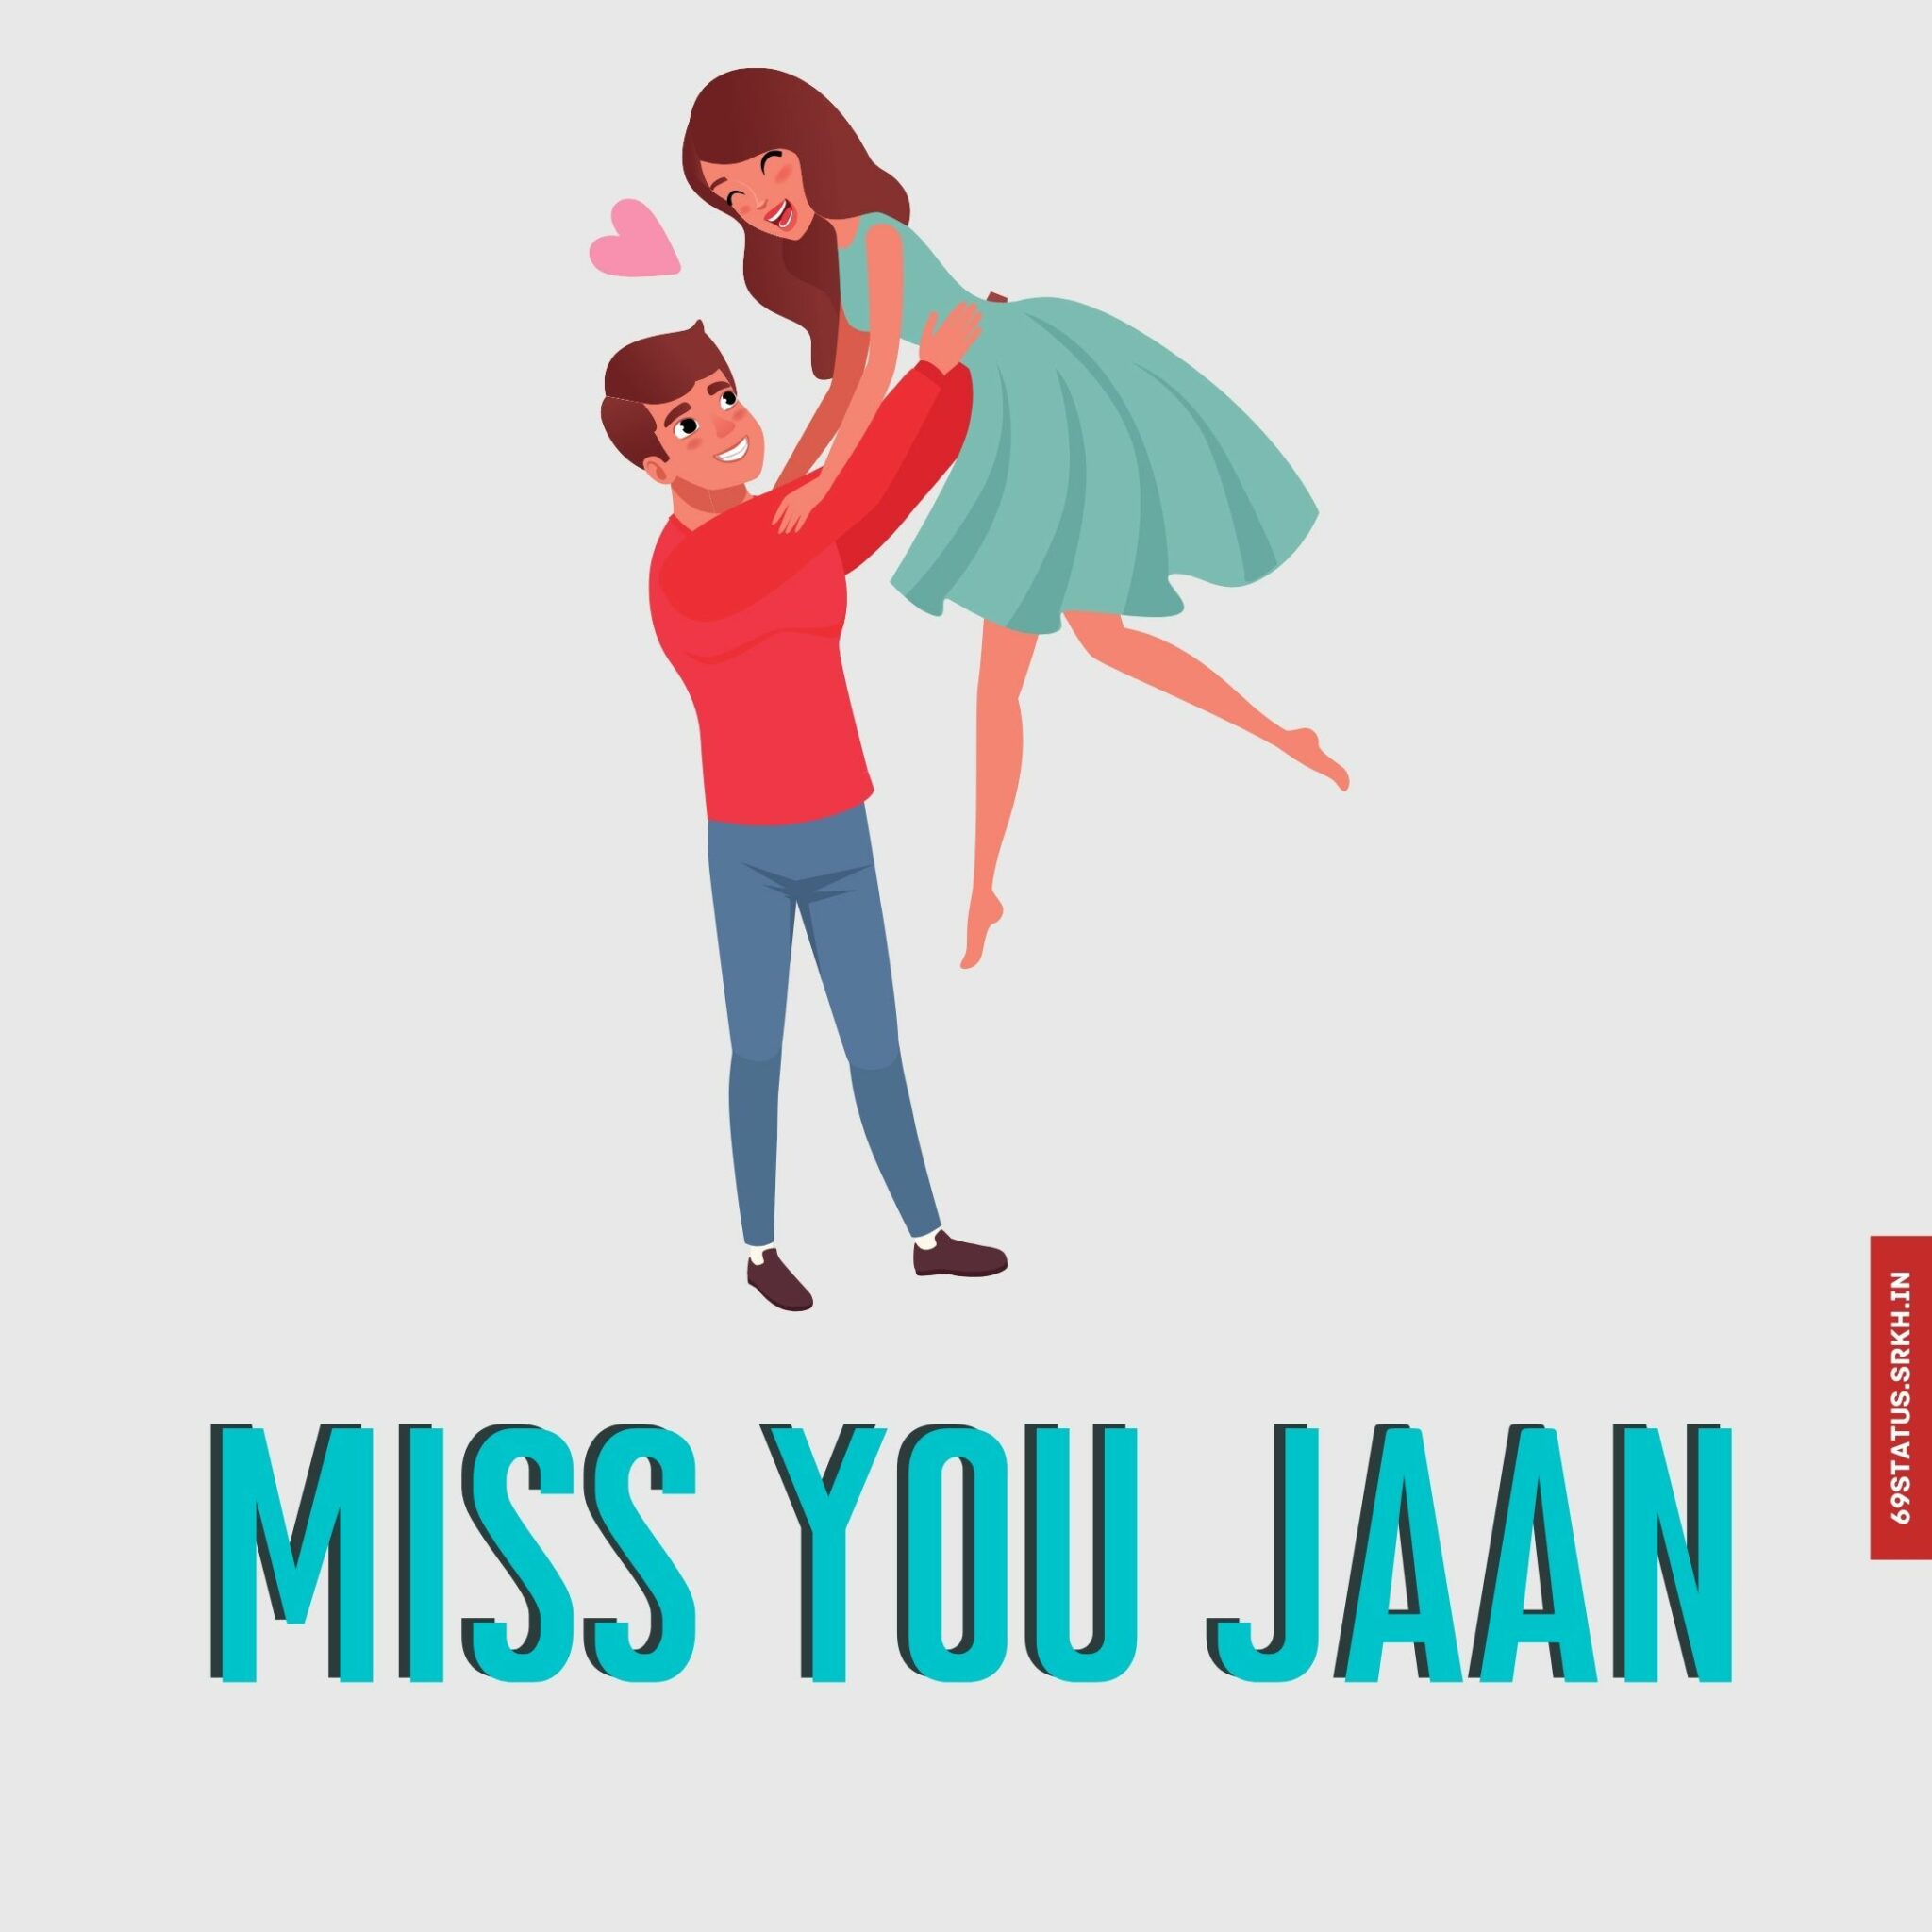 Miss you jaan images